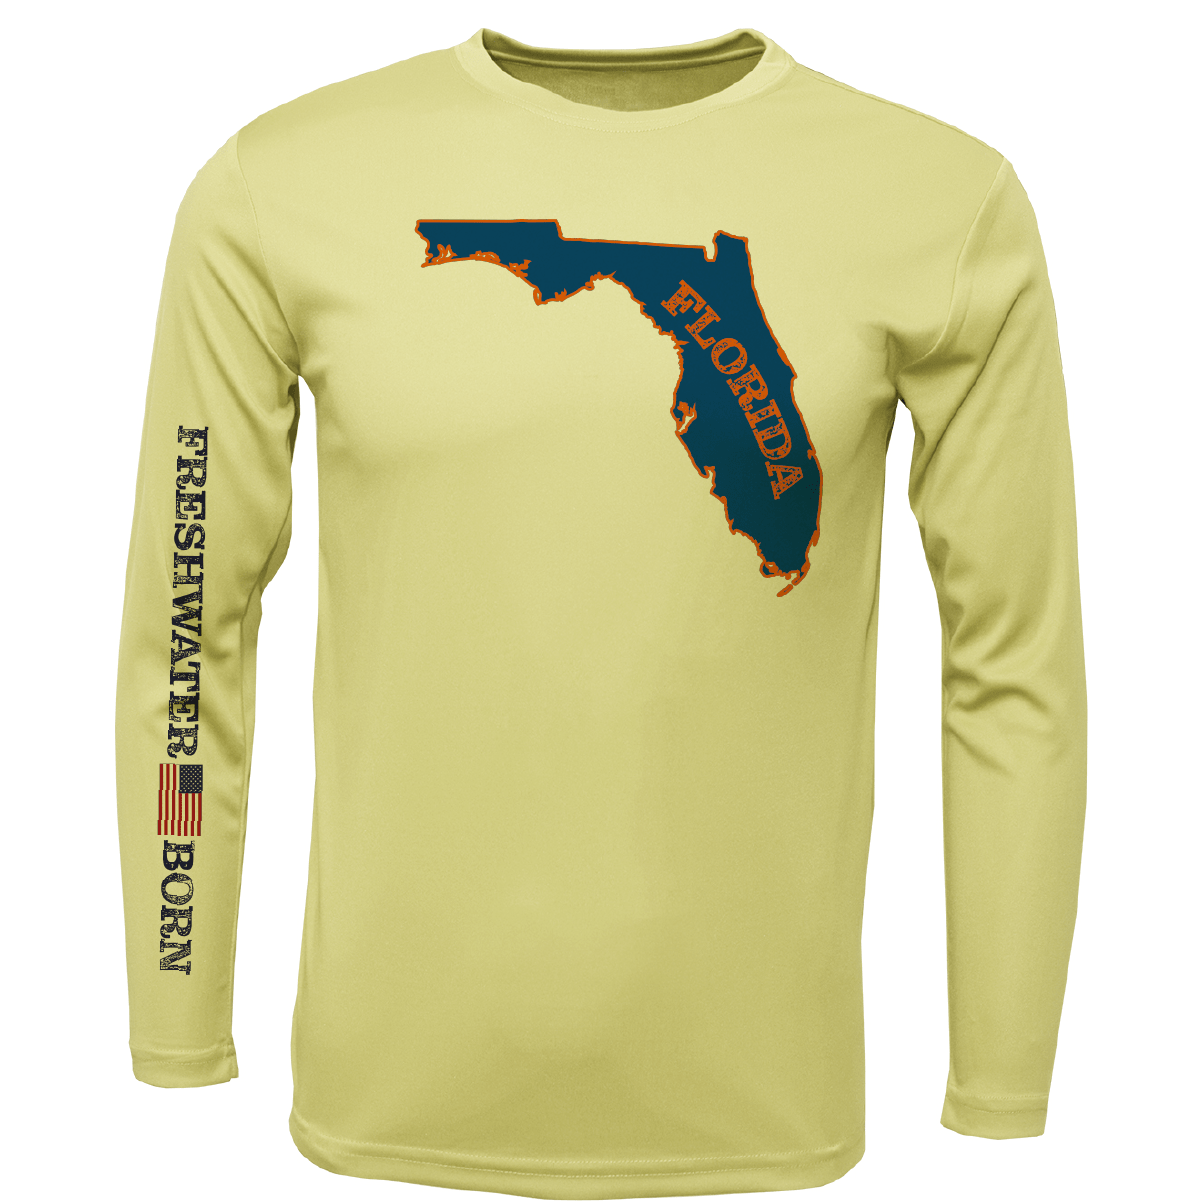 Saltwater Born Shirts YOUTH S / CANARY UF Orange and Blue Freshwater Born Boy's Long Sleeve UPF 50+ Dry-Fit Shirt